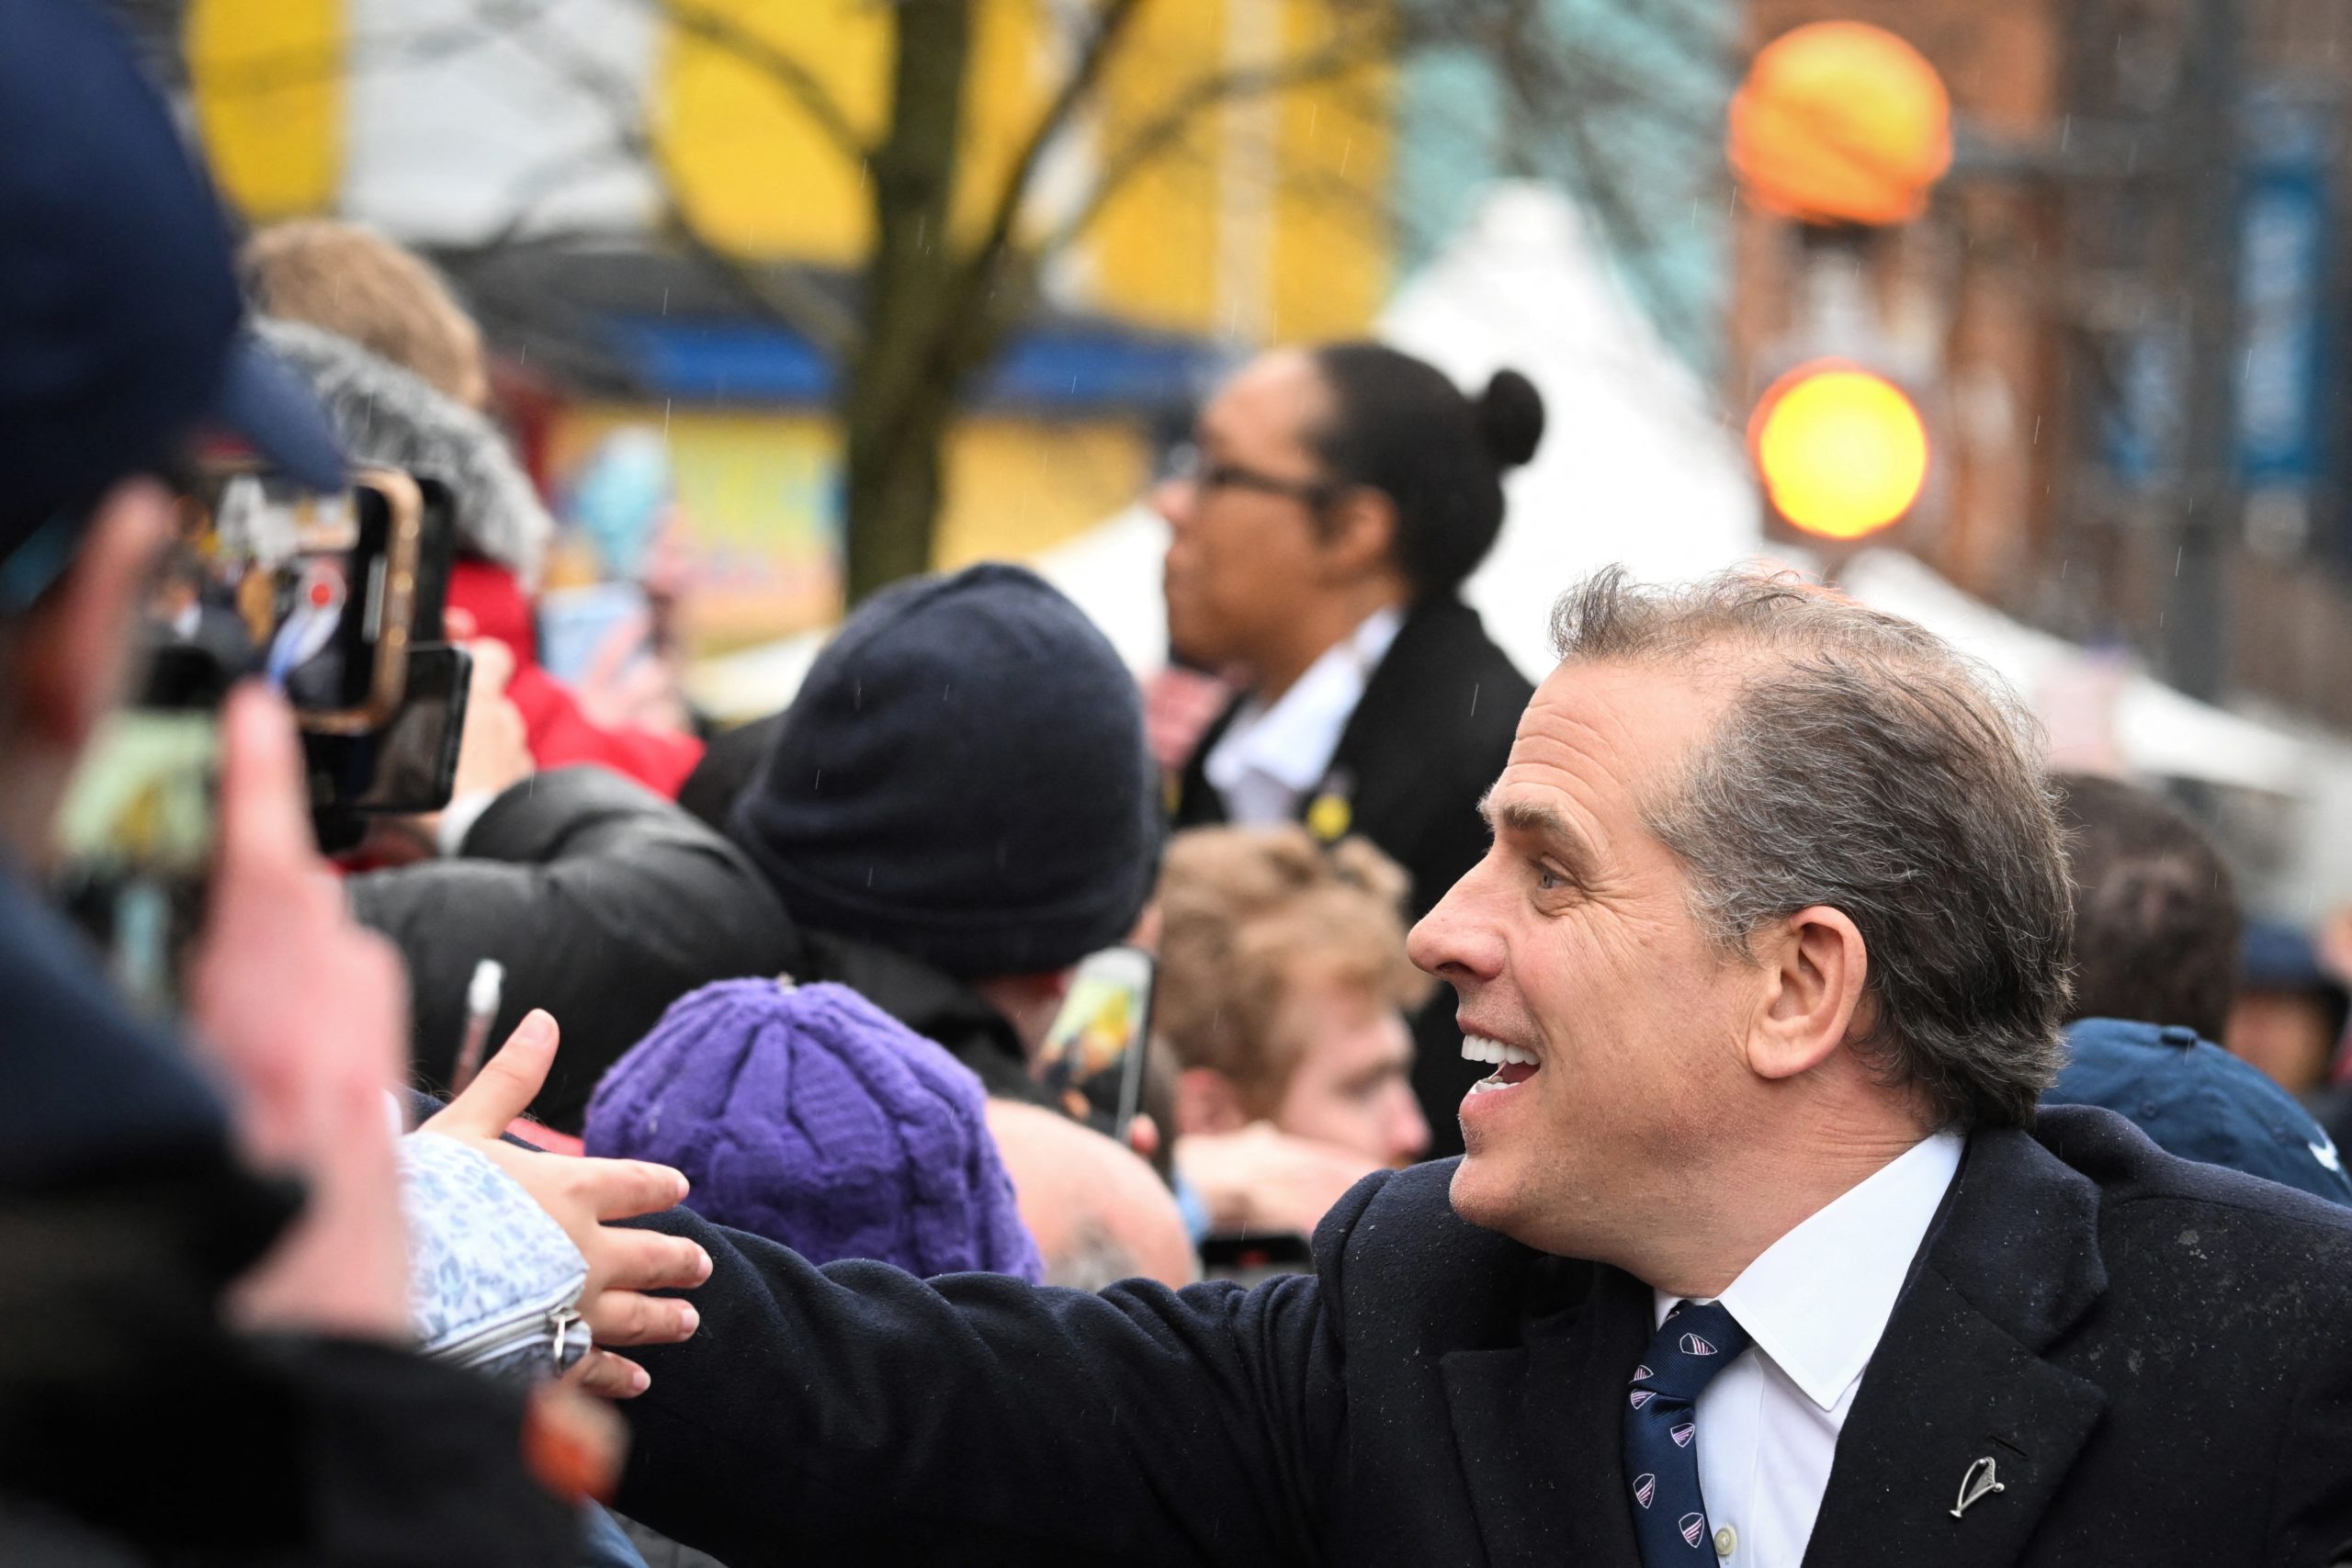 Hunter Biden, US President Joe Biden's son, greets members of the public during a walking tour of Dowtown Dundalk, on April 12, 2023, as part of a four day trip to Northern Ireland and Ireland for the 25th anniversary commemorations of the "Good Friday Agreement". (Photo by Jim WATSON / AFP) (Photo by JIM WATSON/AFP via Getty Images)